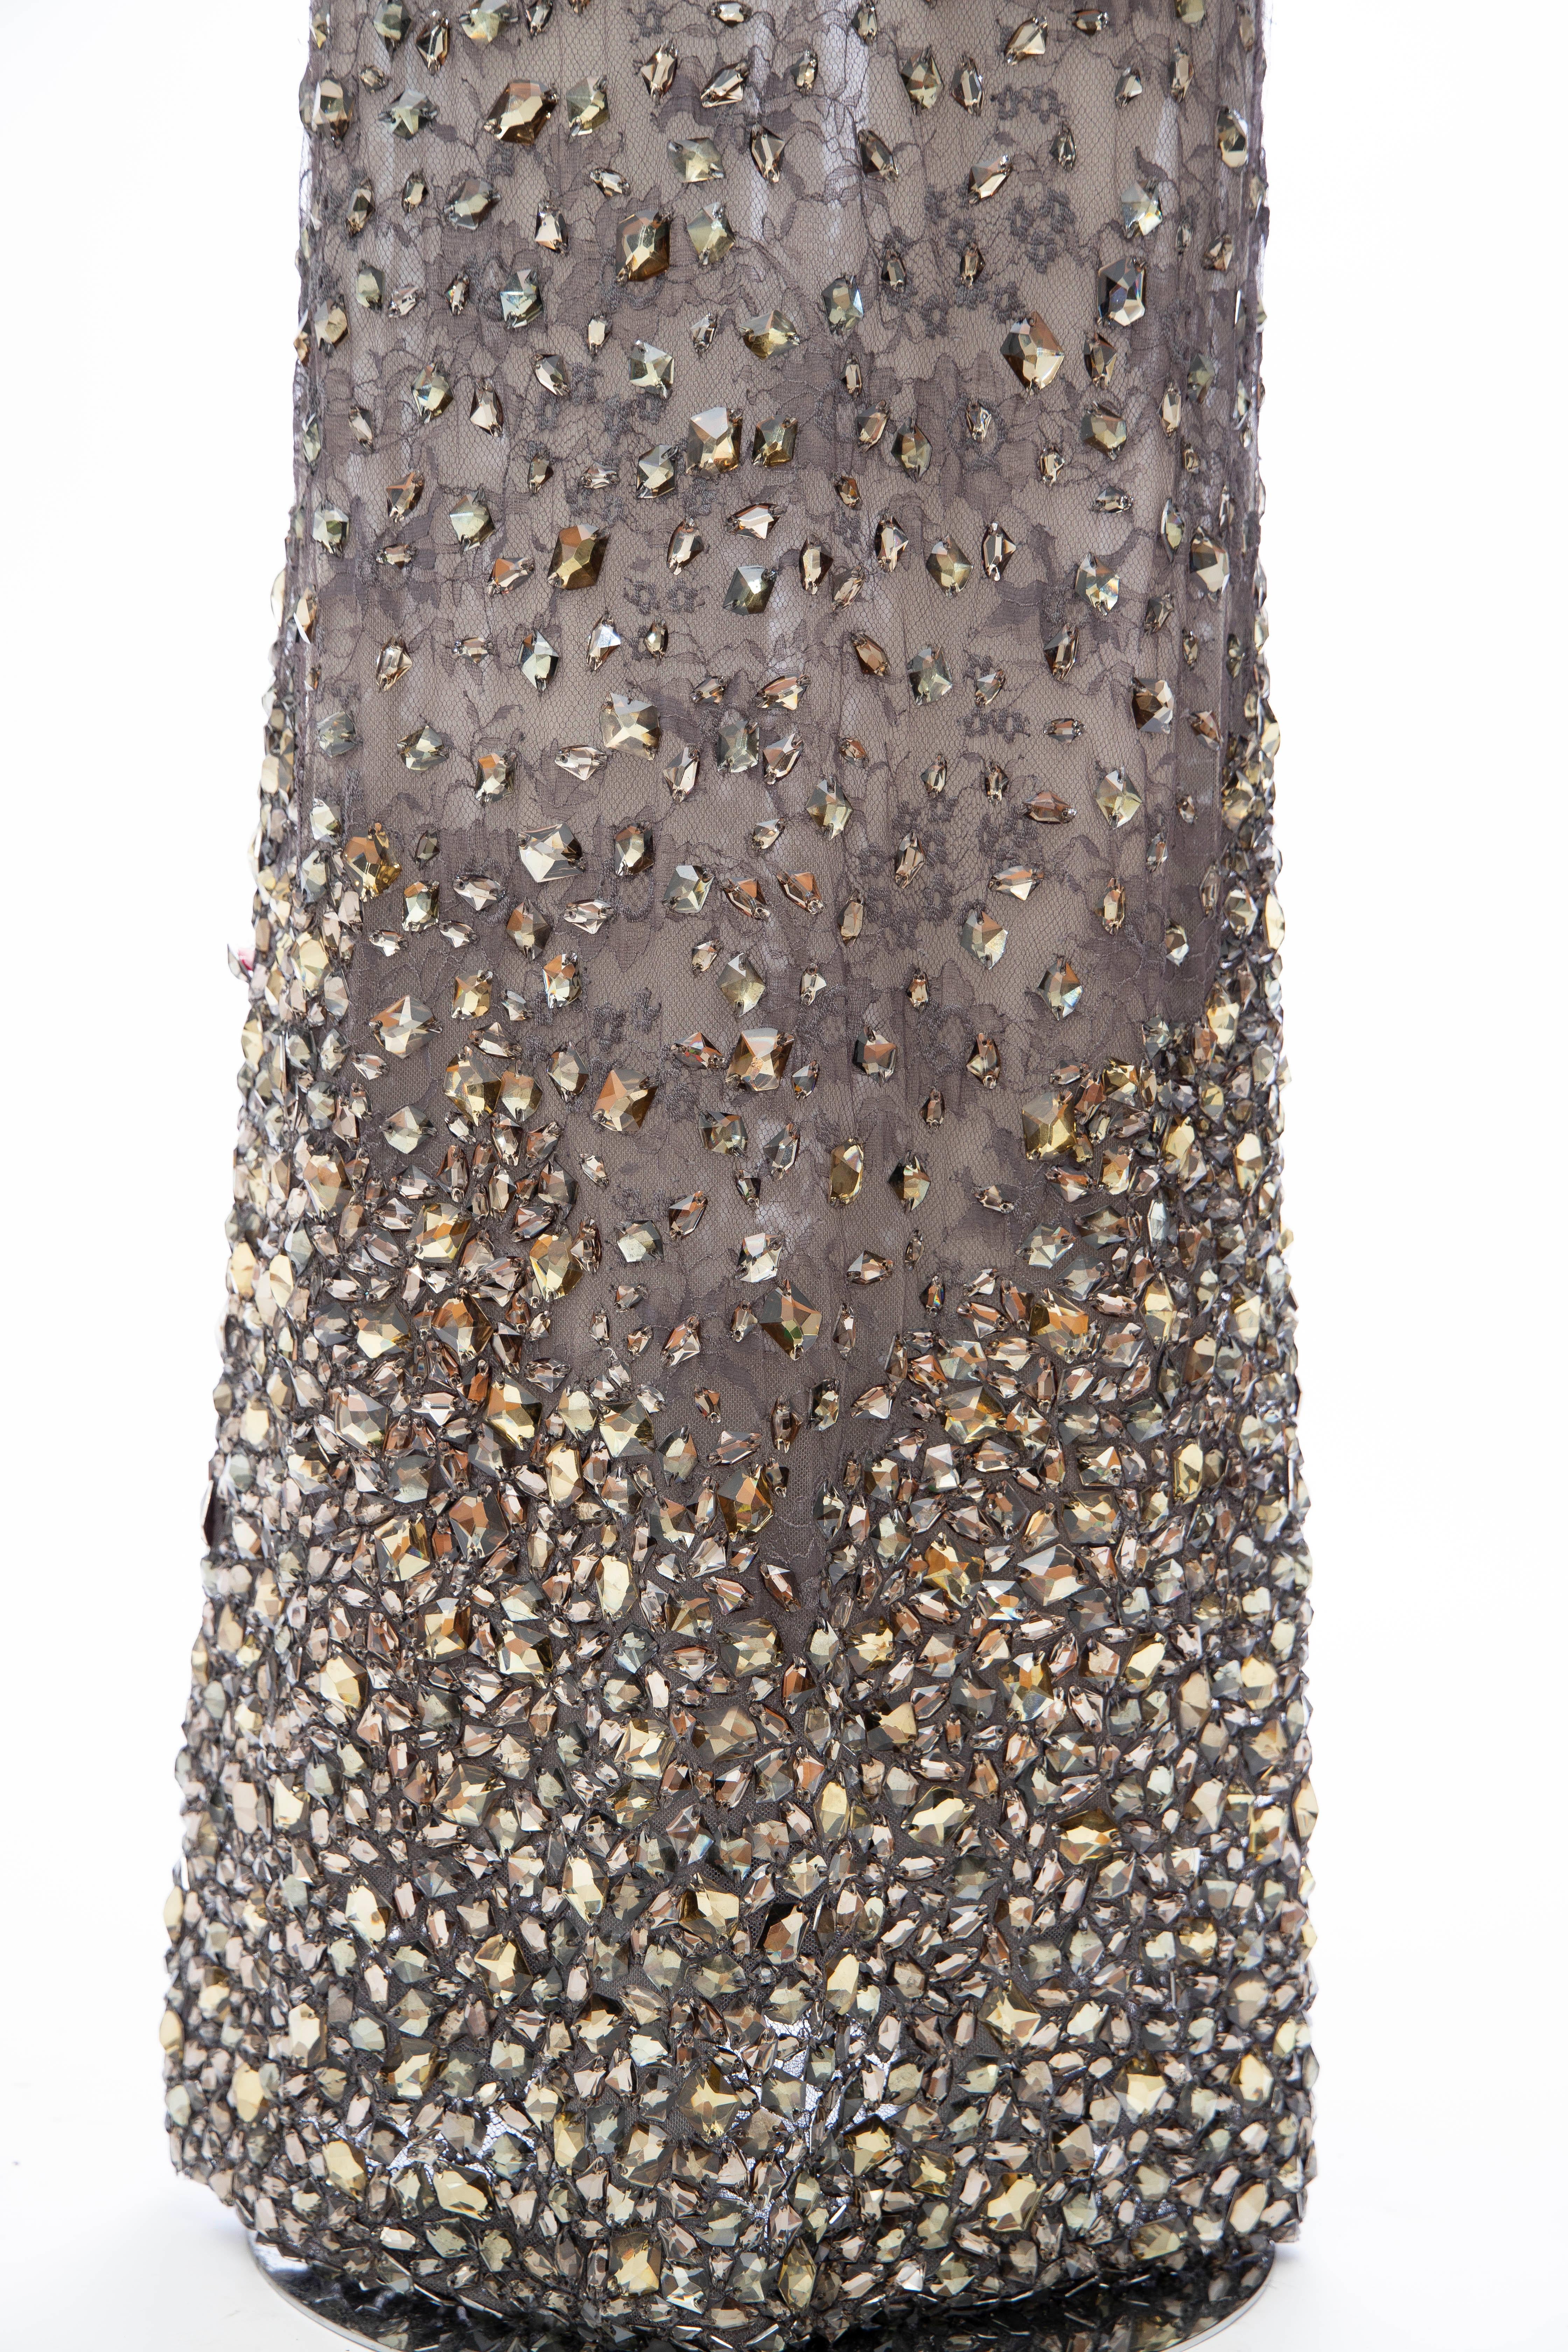 Tom Ford Runway Smokey Grey Lace Appliquéd Faceted Gems Evening Dress, Fall 2011 For Sale 1